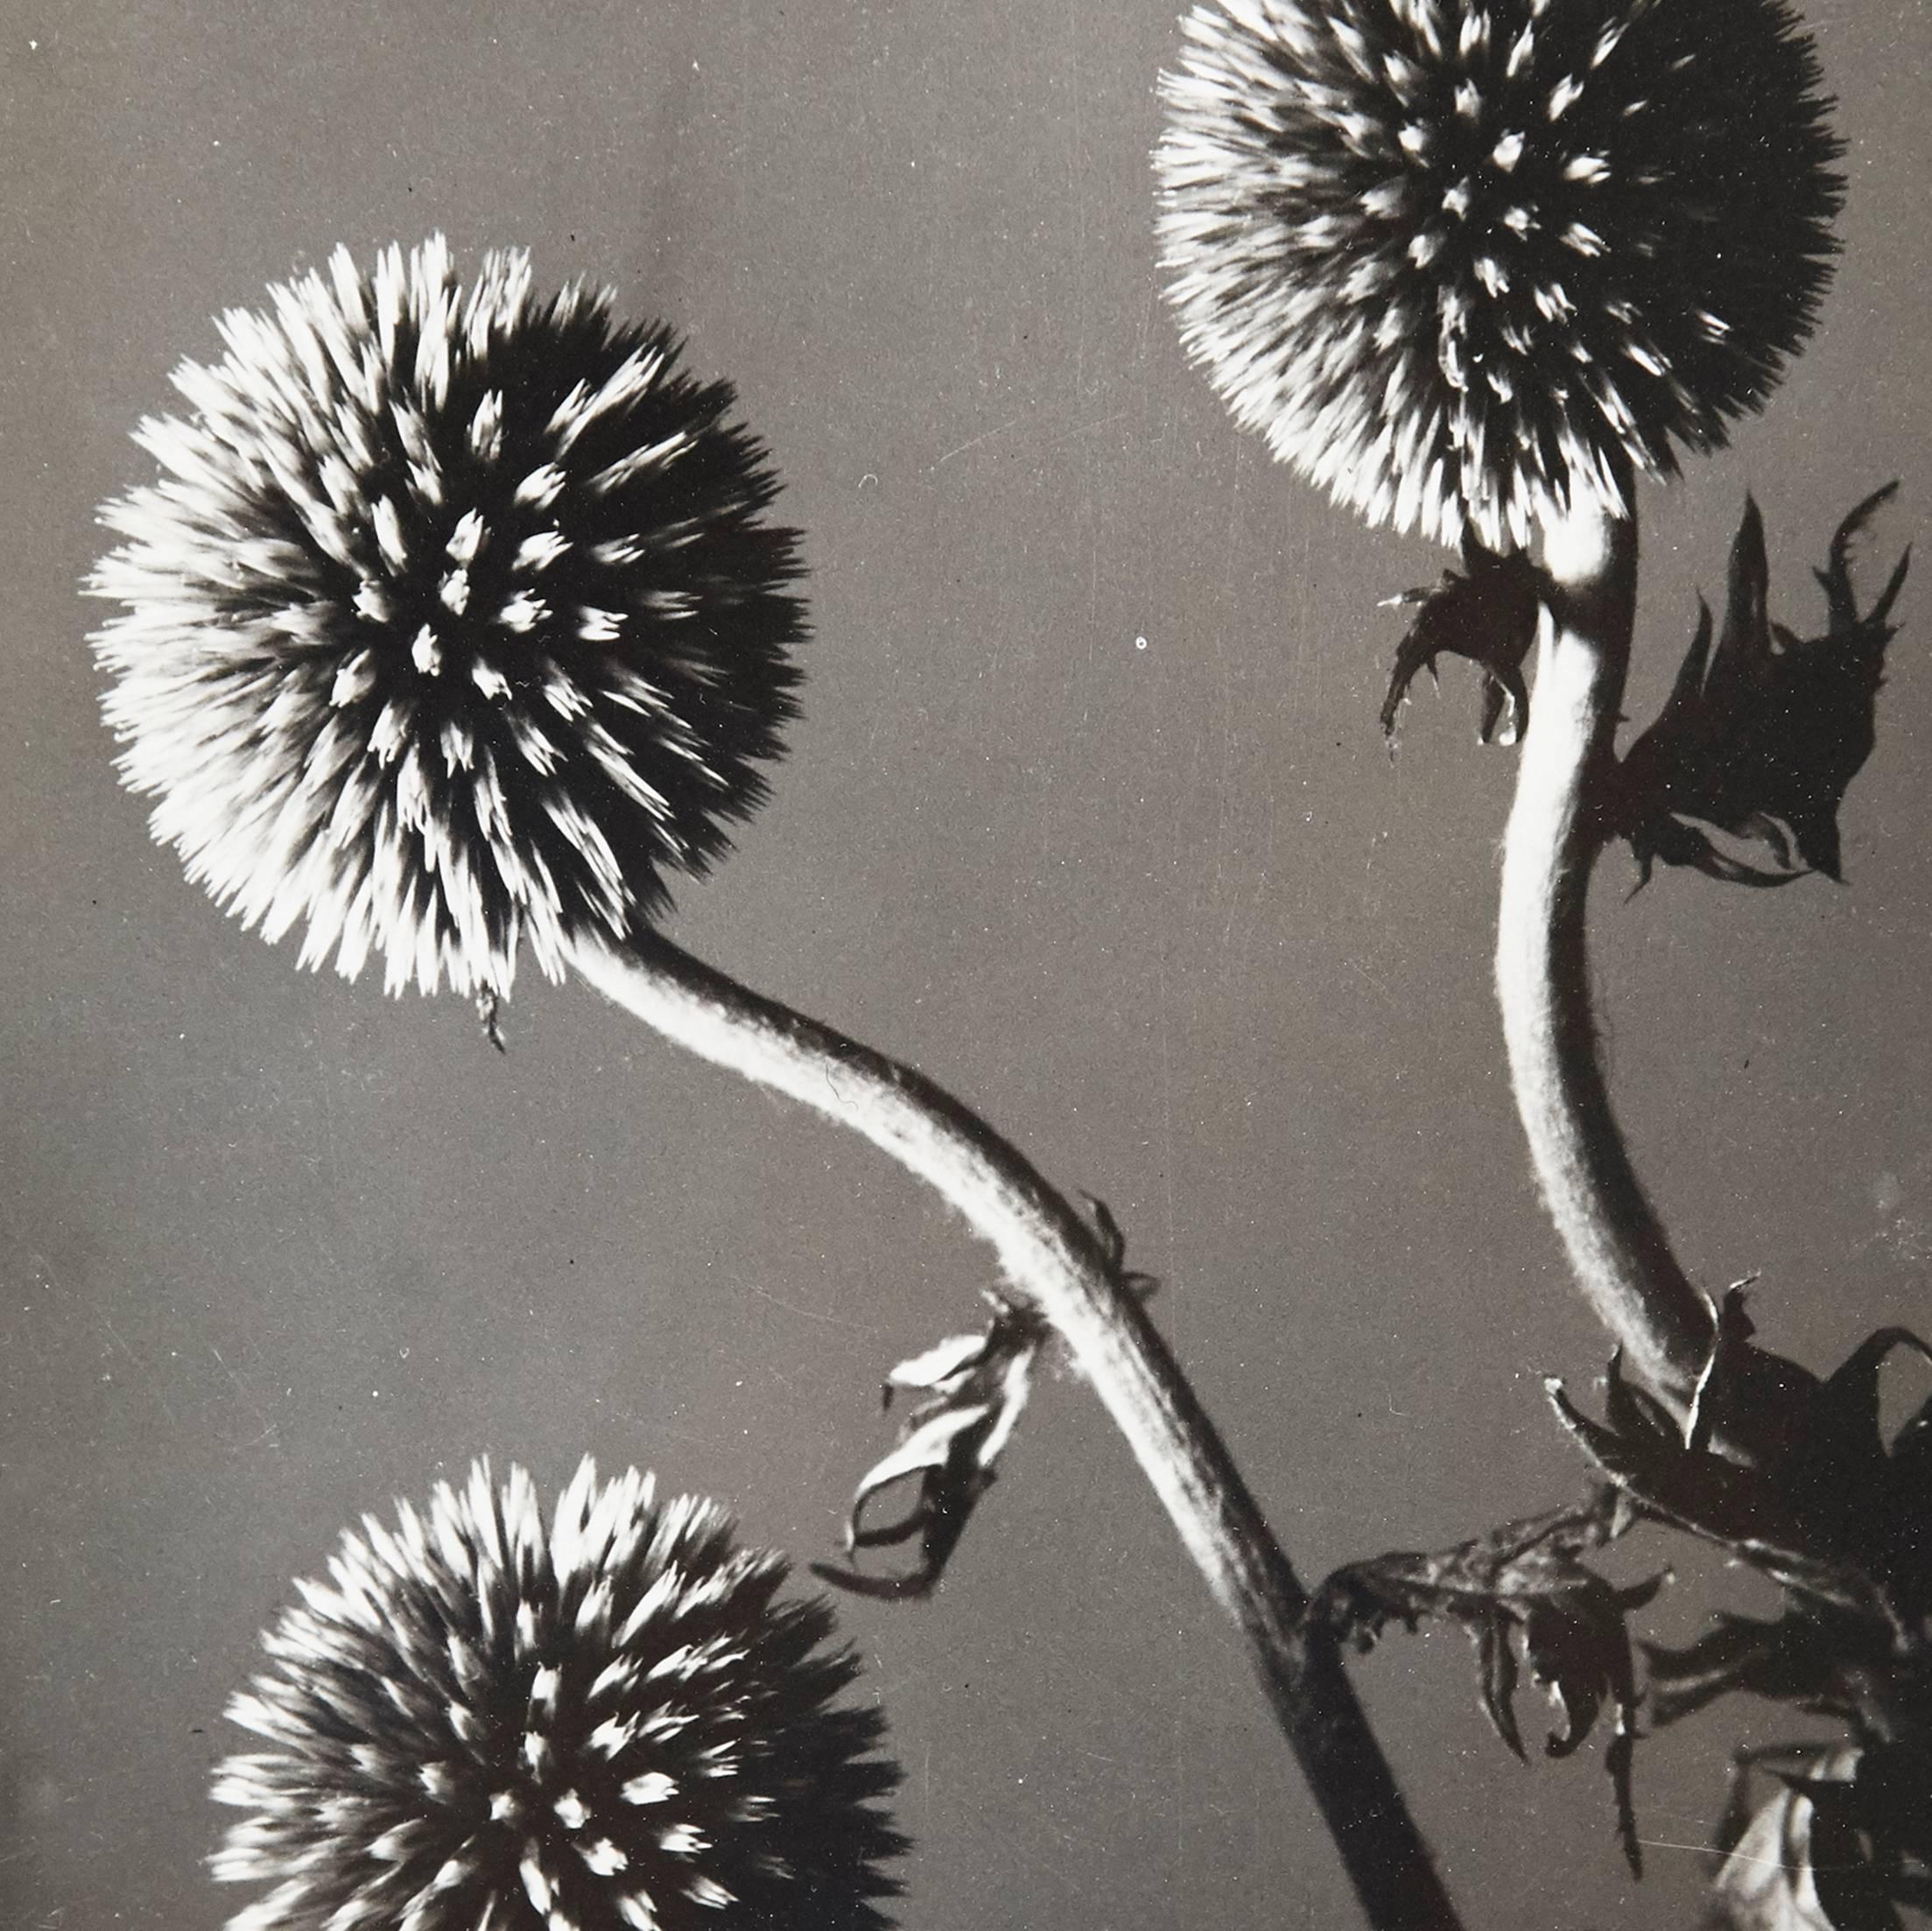 Flowers photographed by Man Ray in 1934.

A posthumous print from the original negative circa 1970 by Pierre Gassmann. Gelatin silver bromide.
Frame not included.

In good original conditions.

Born (Philadelphia, 1890 - Paris, 1976) Emmanuel